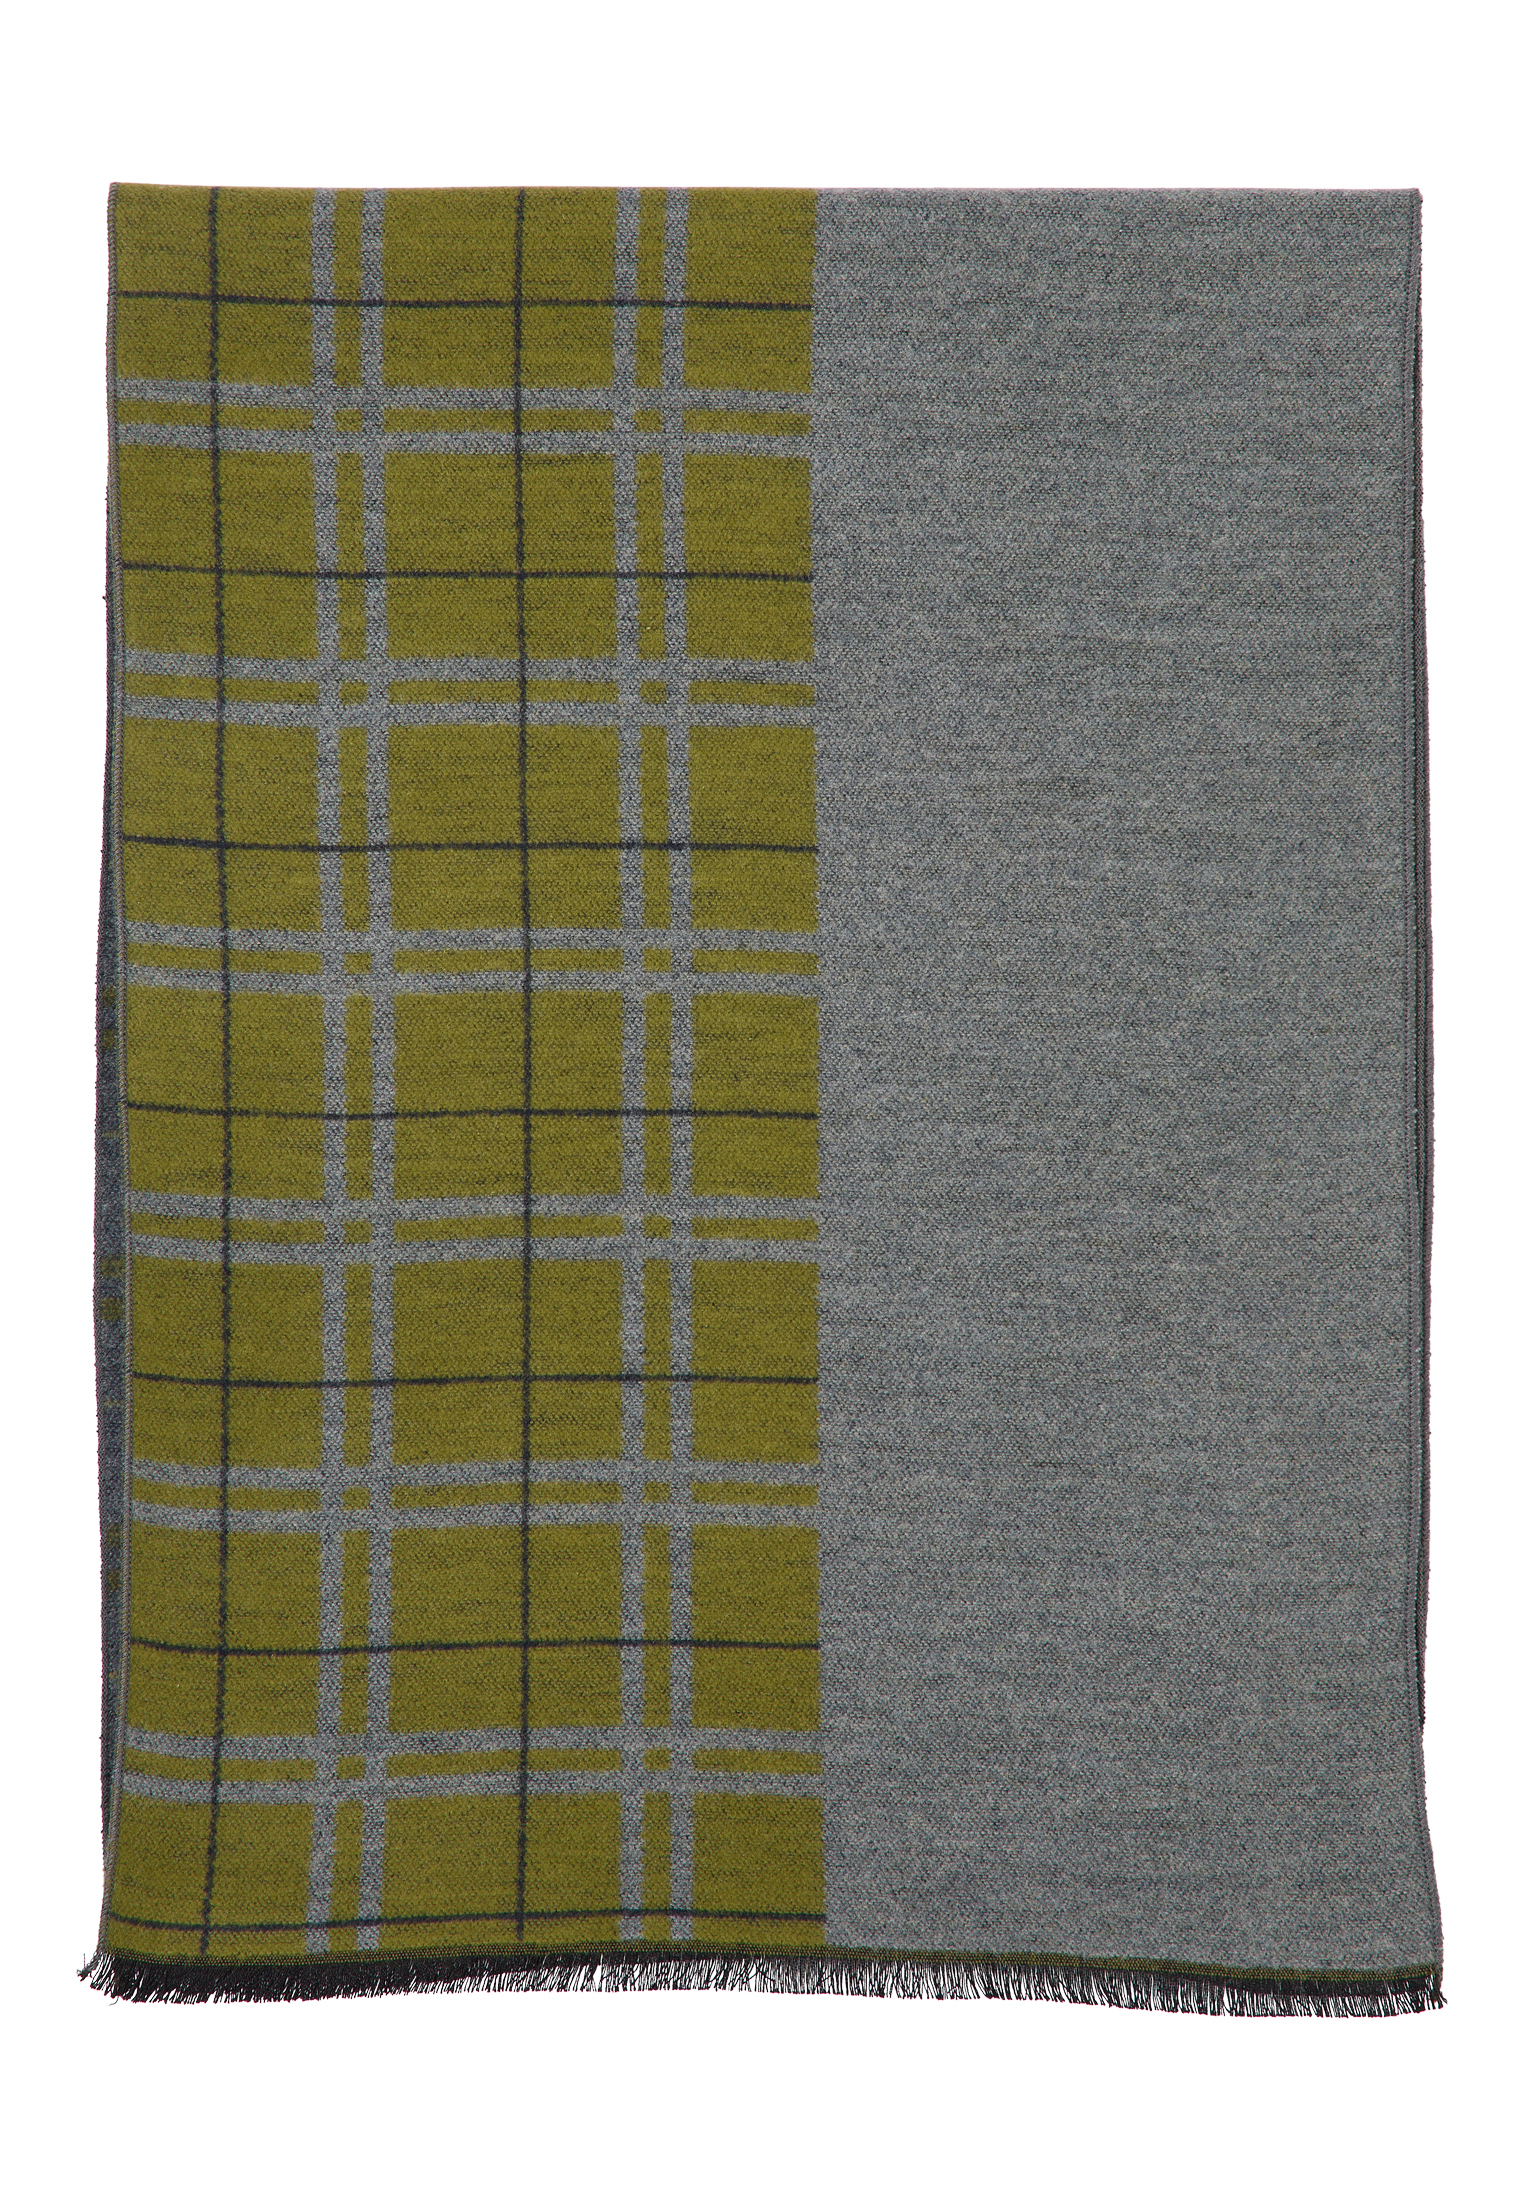 Scarf in sage green checkered